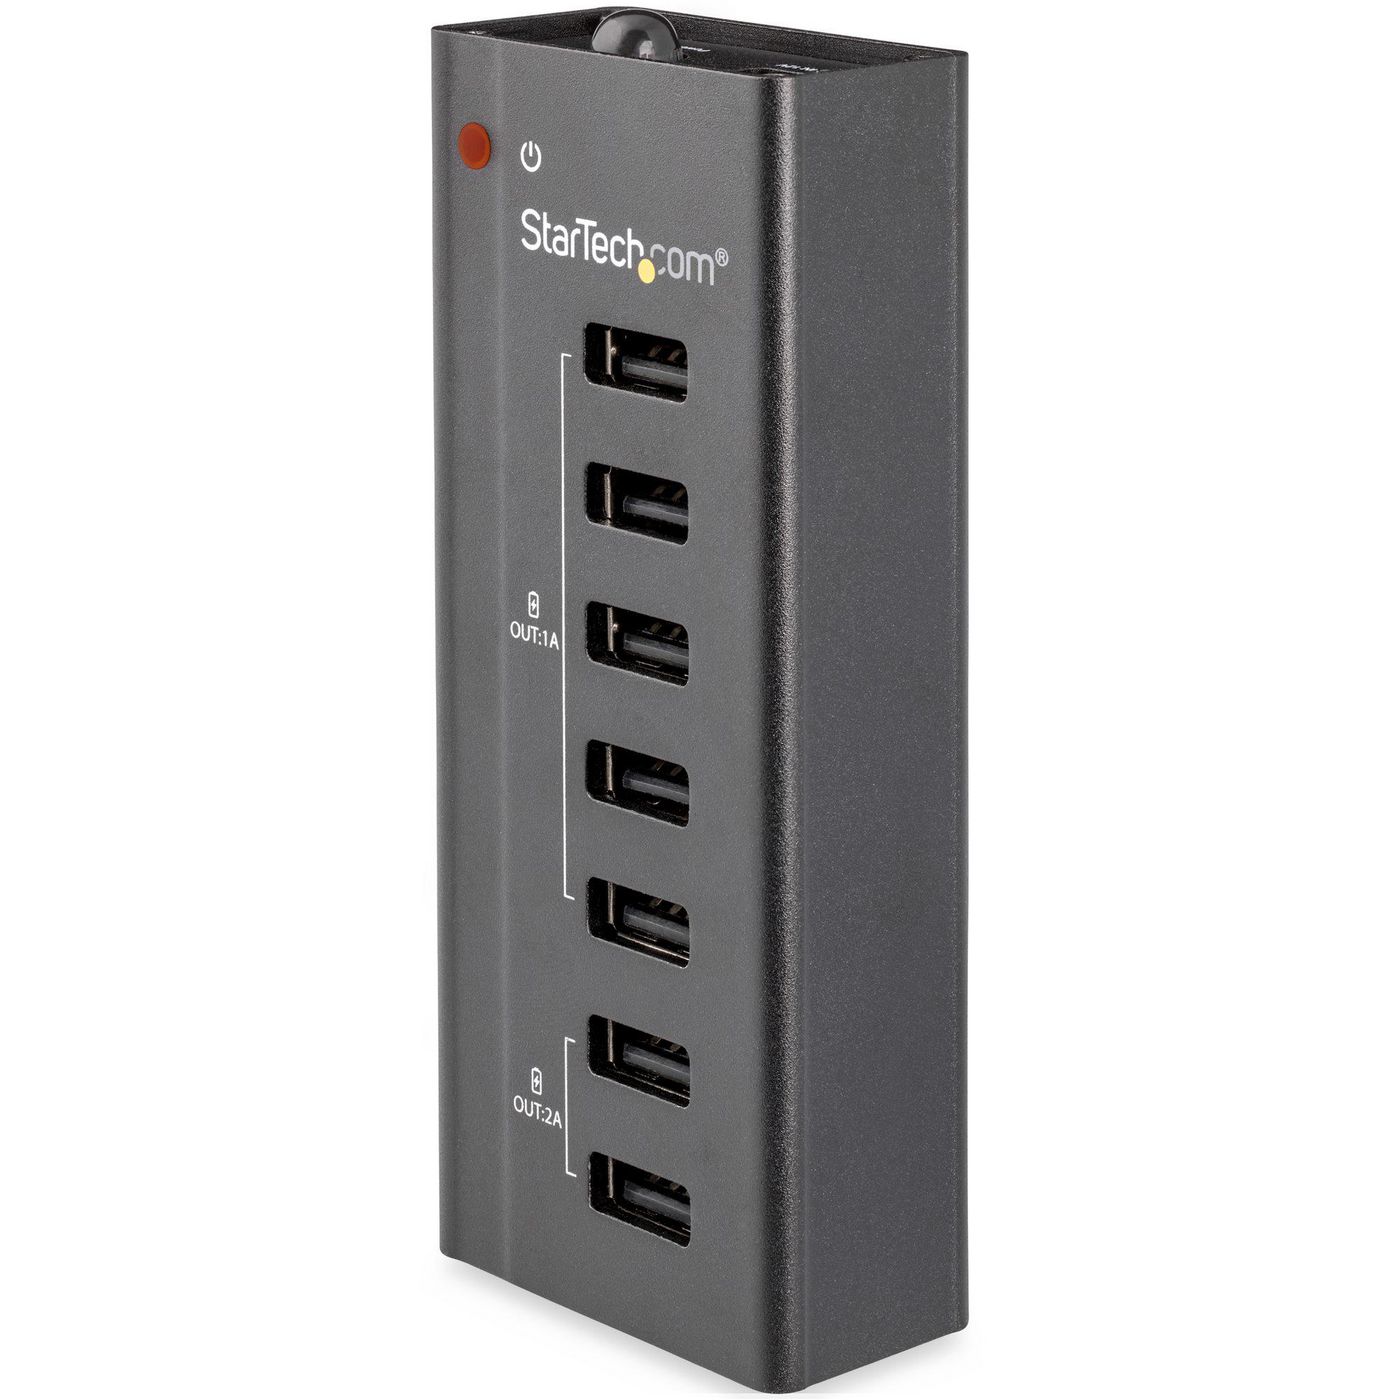 STARTECH.COM 7 Port USB Charging Station with 5x 1A Ports and 2x 2A Ports - Standalone USB Charging